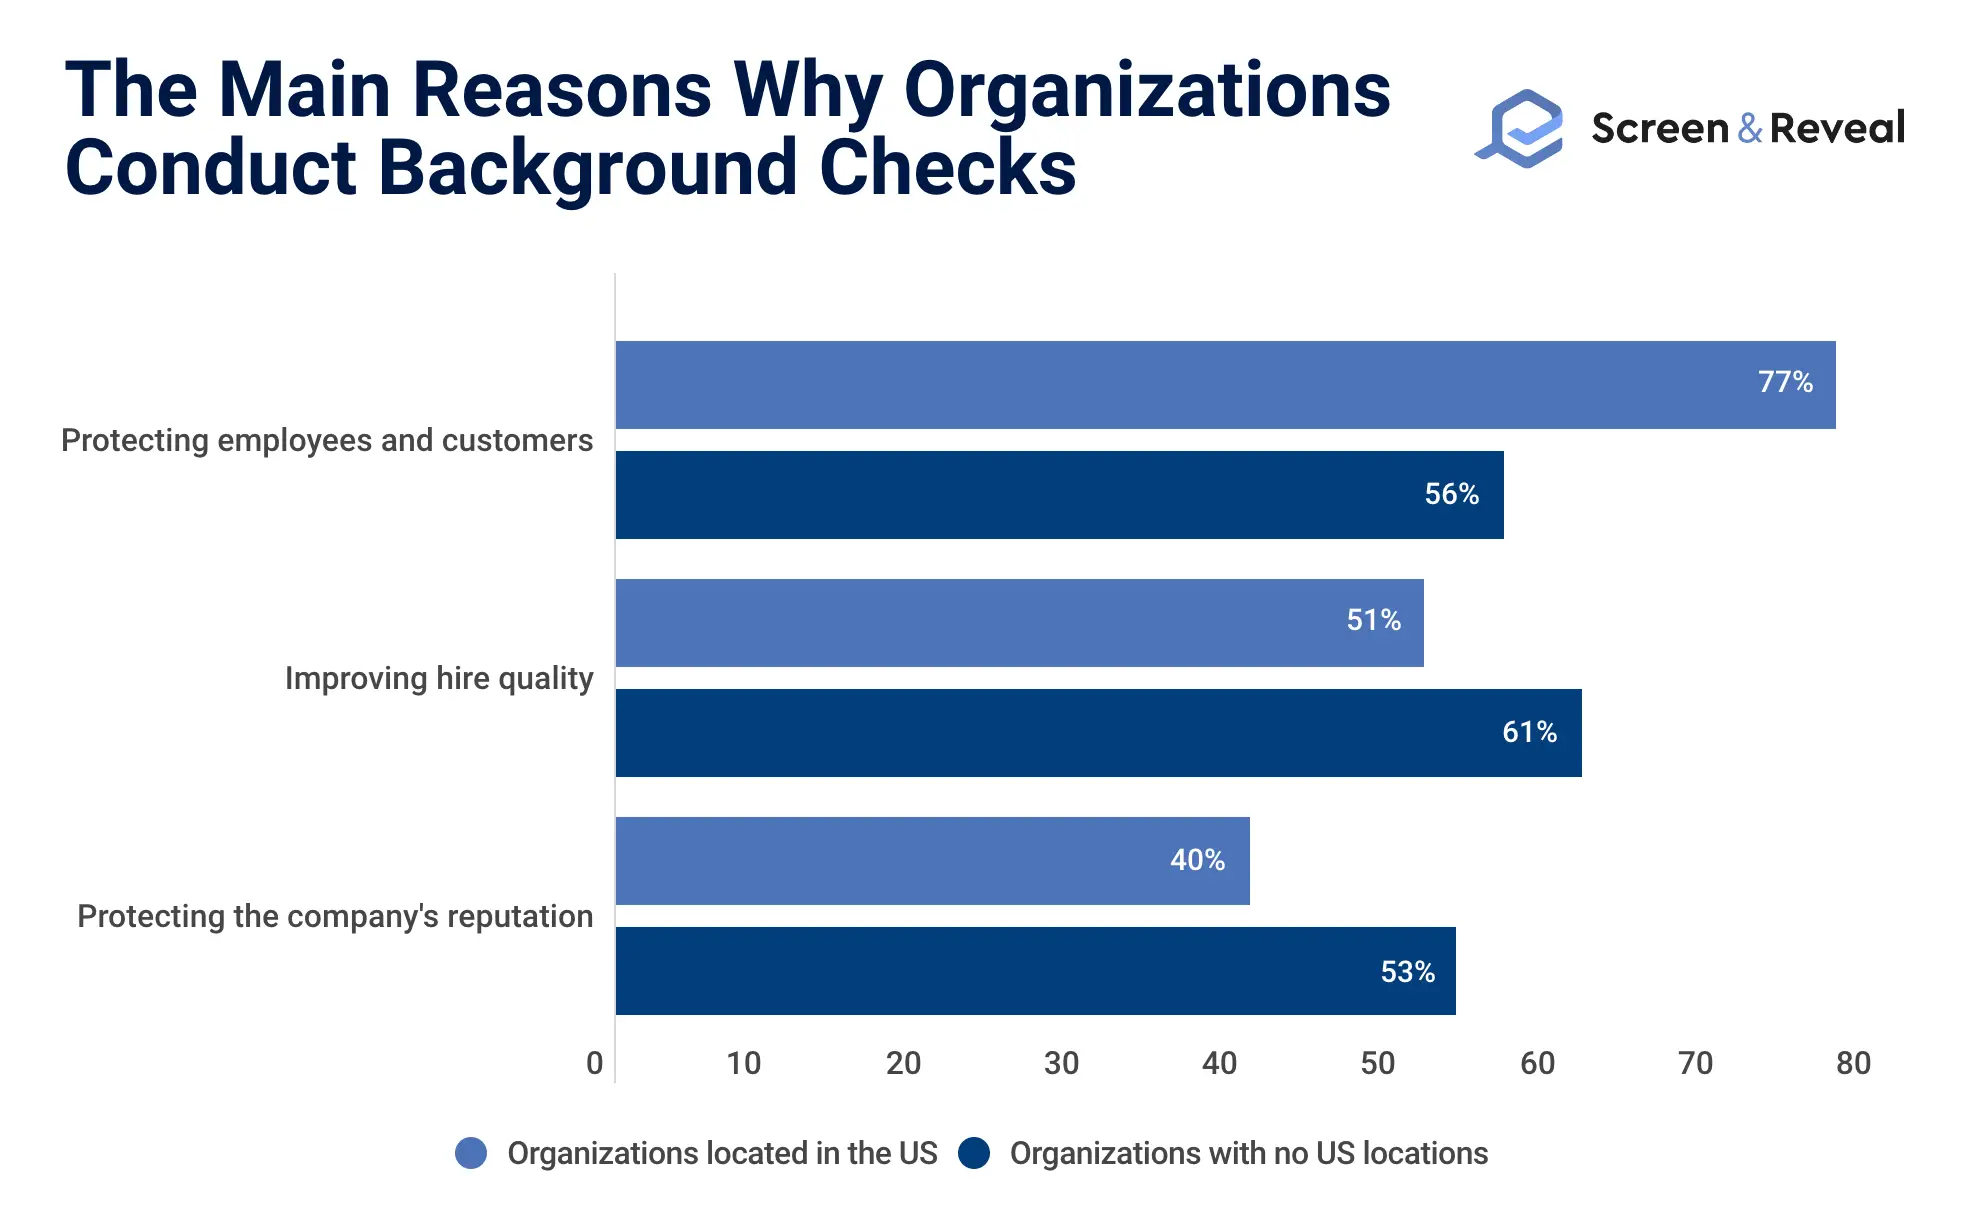 The Main Reasons Why Organizations Conduct Background Checks